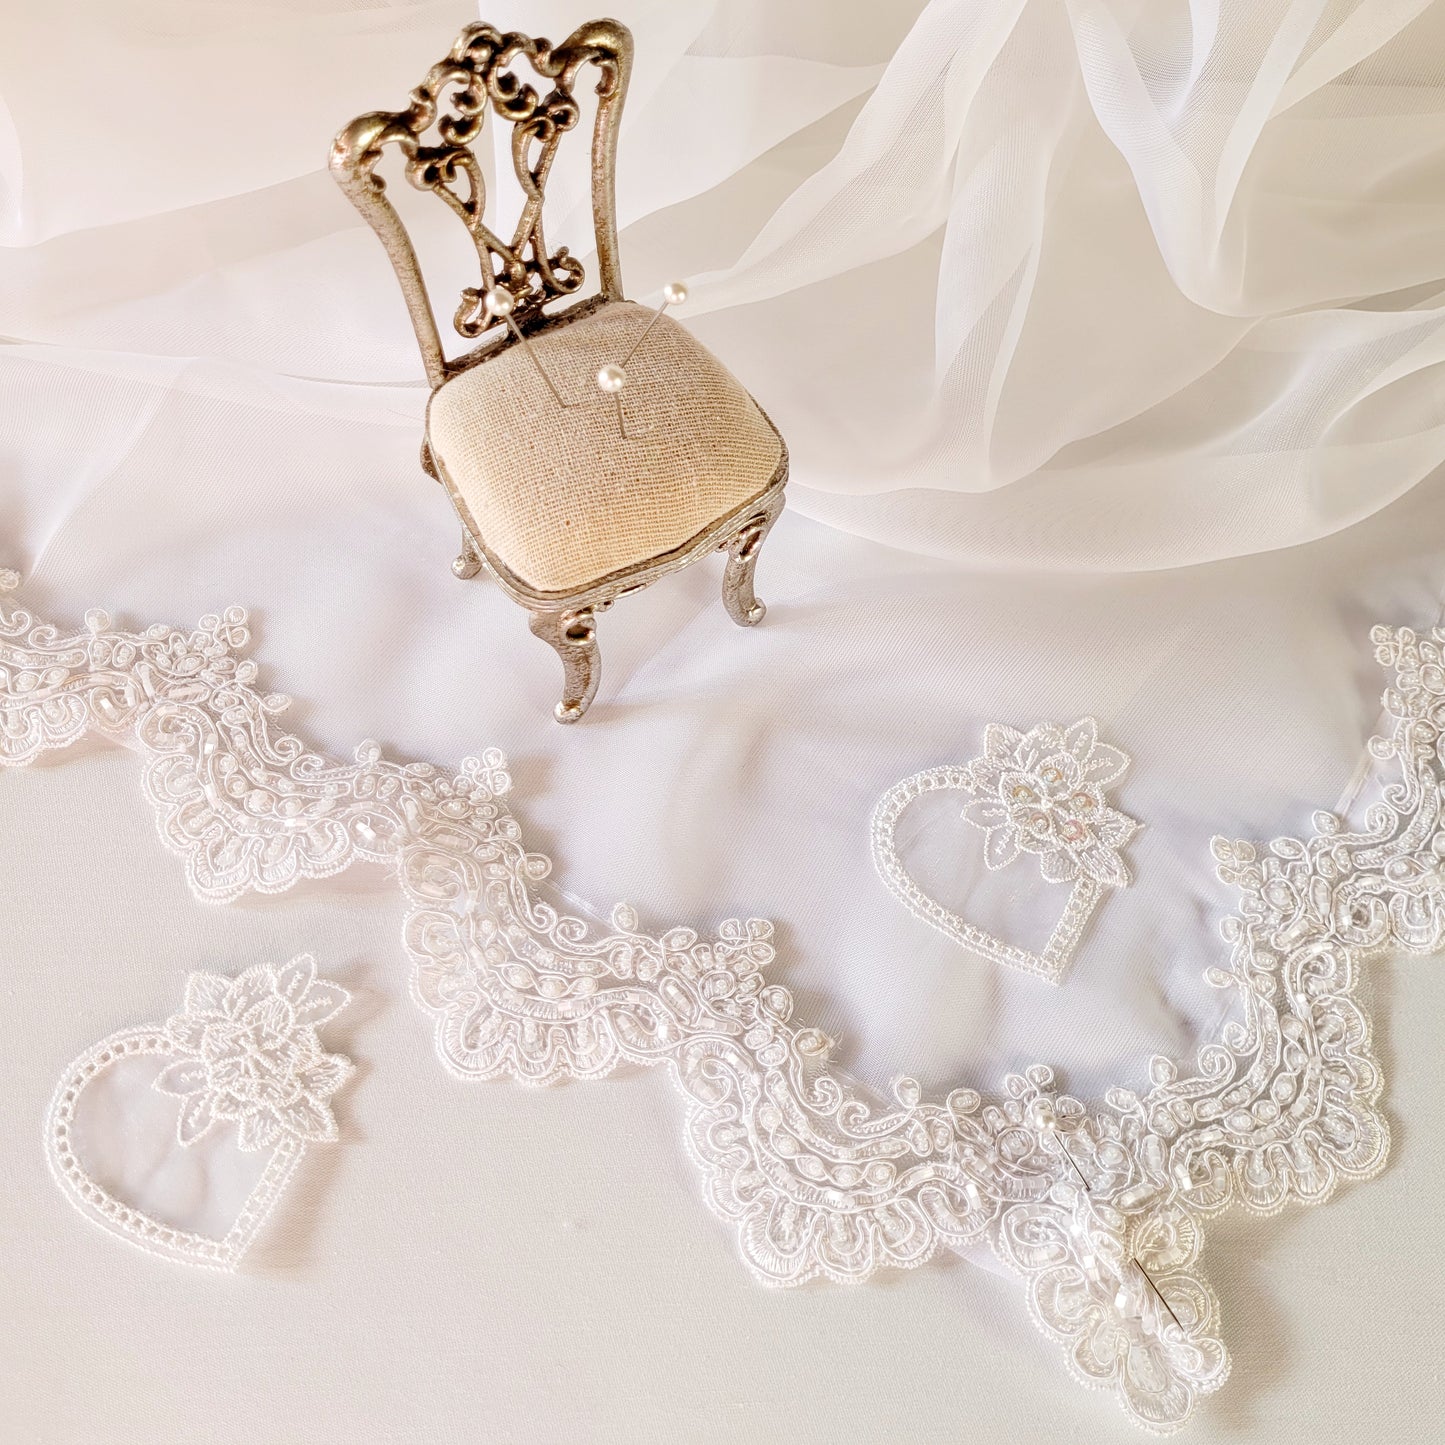 Vintage Flower and Lace Collar Applique  - White